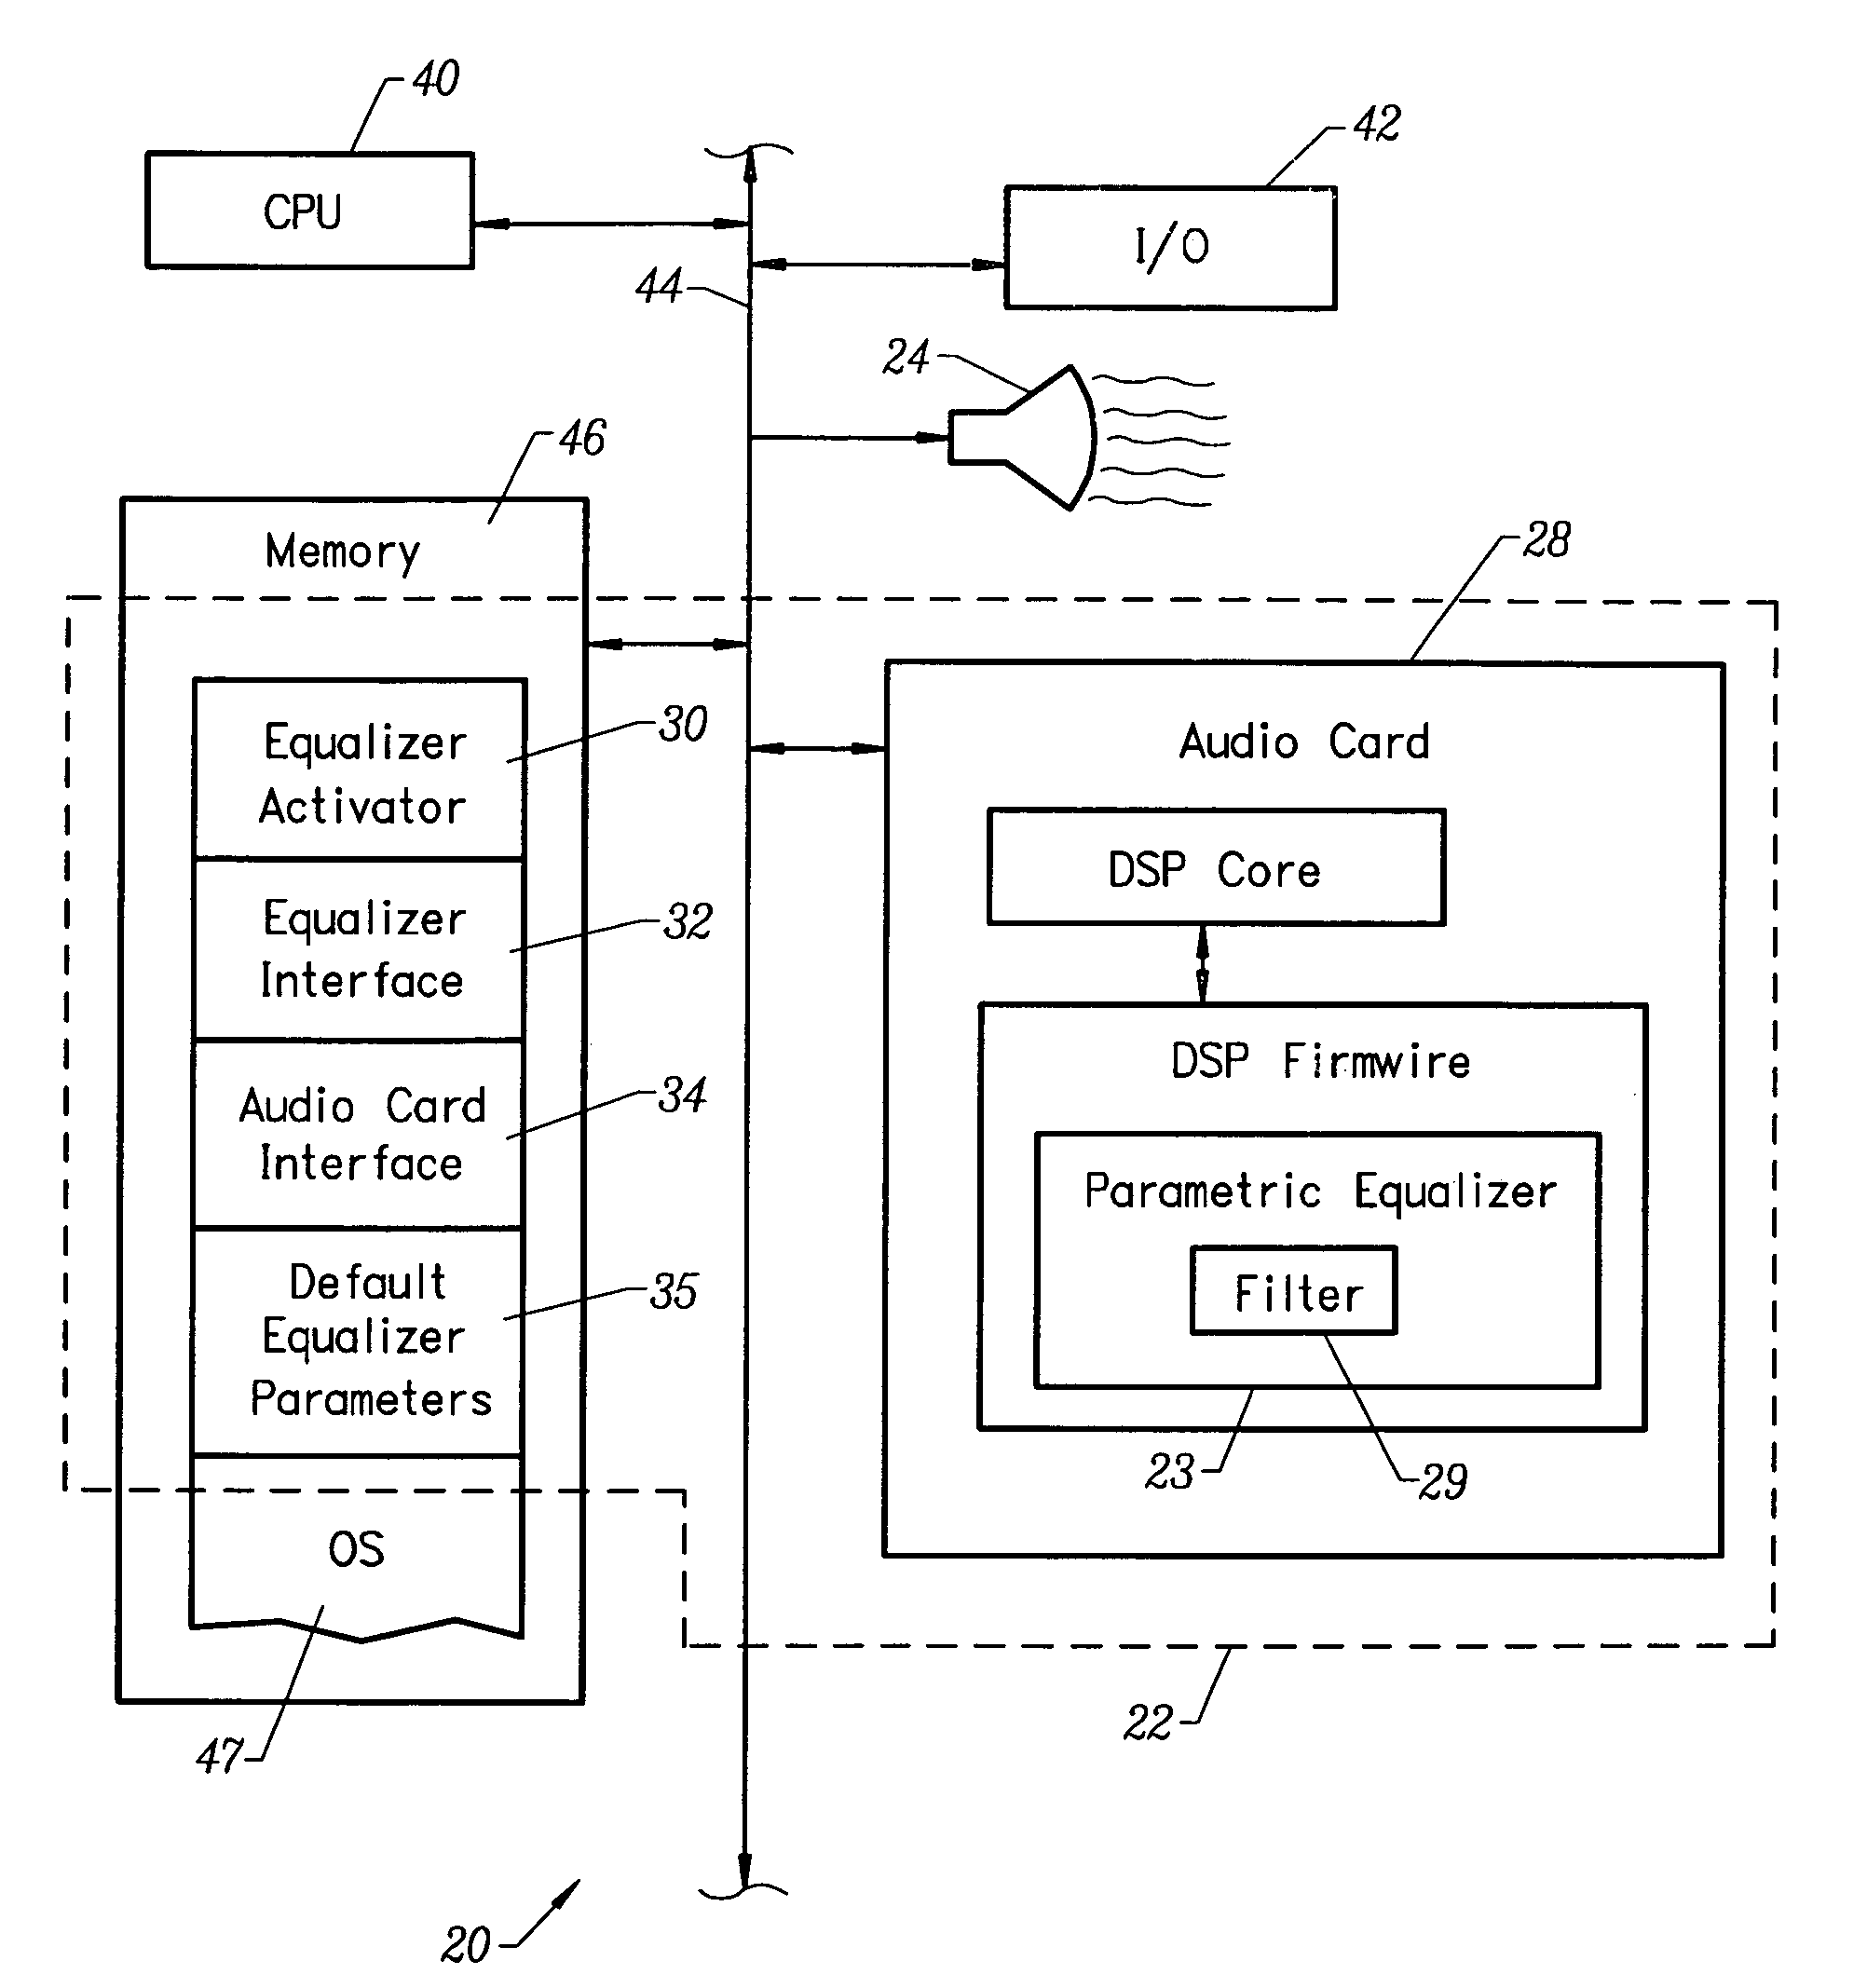 Apparatus and method for improved PC audio quality